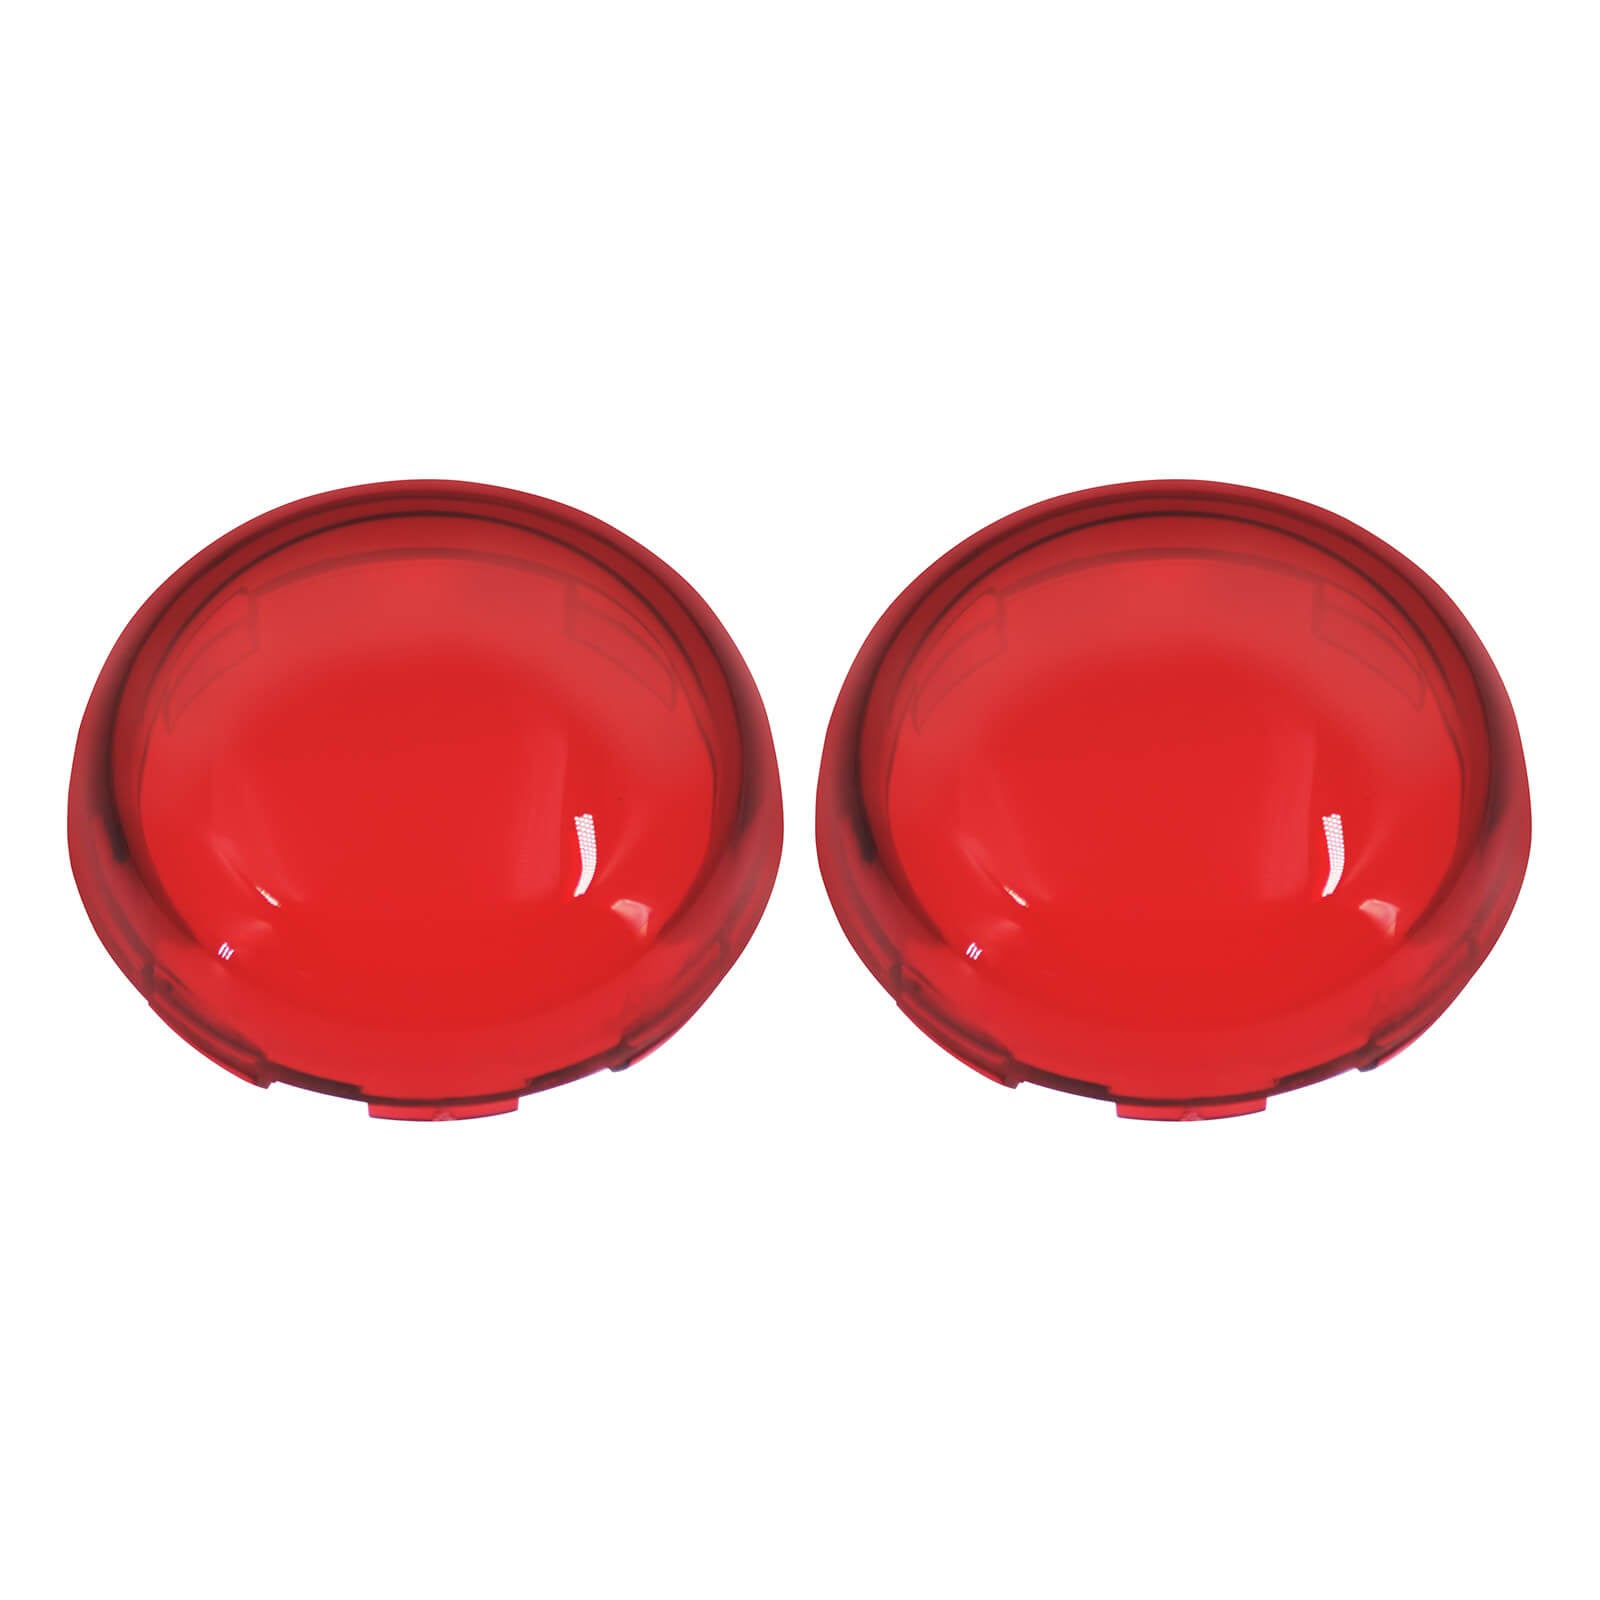 LA0056-motorcycle-turn-signal-lens-cover-red